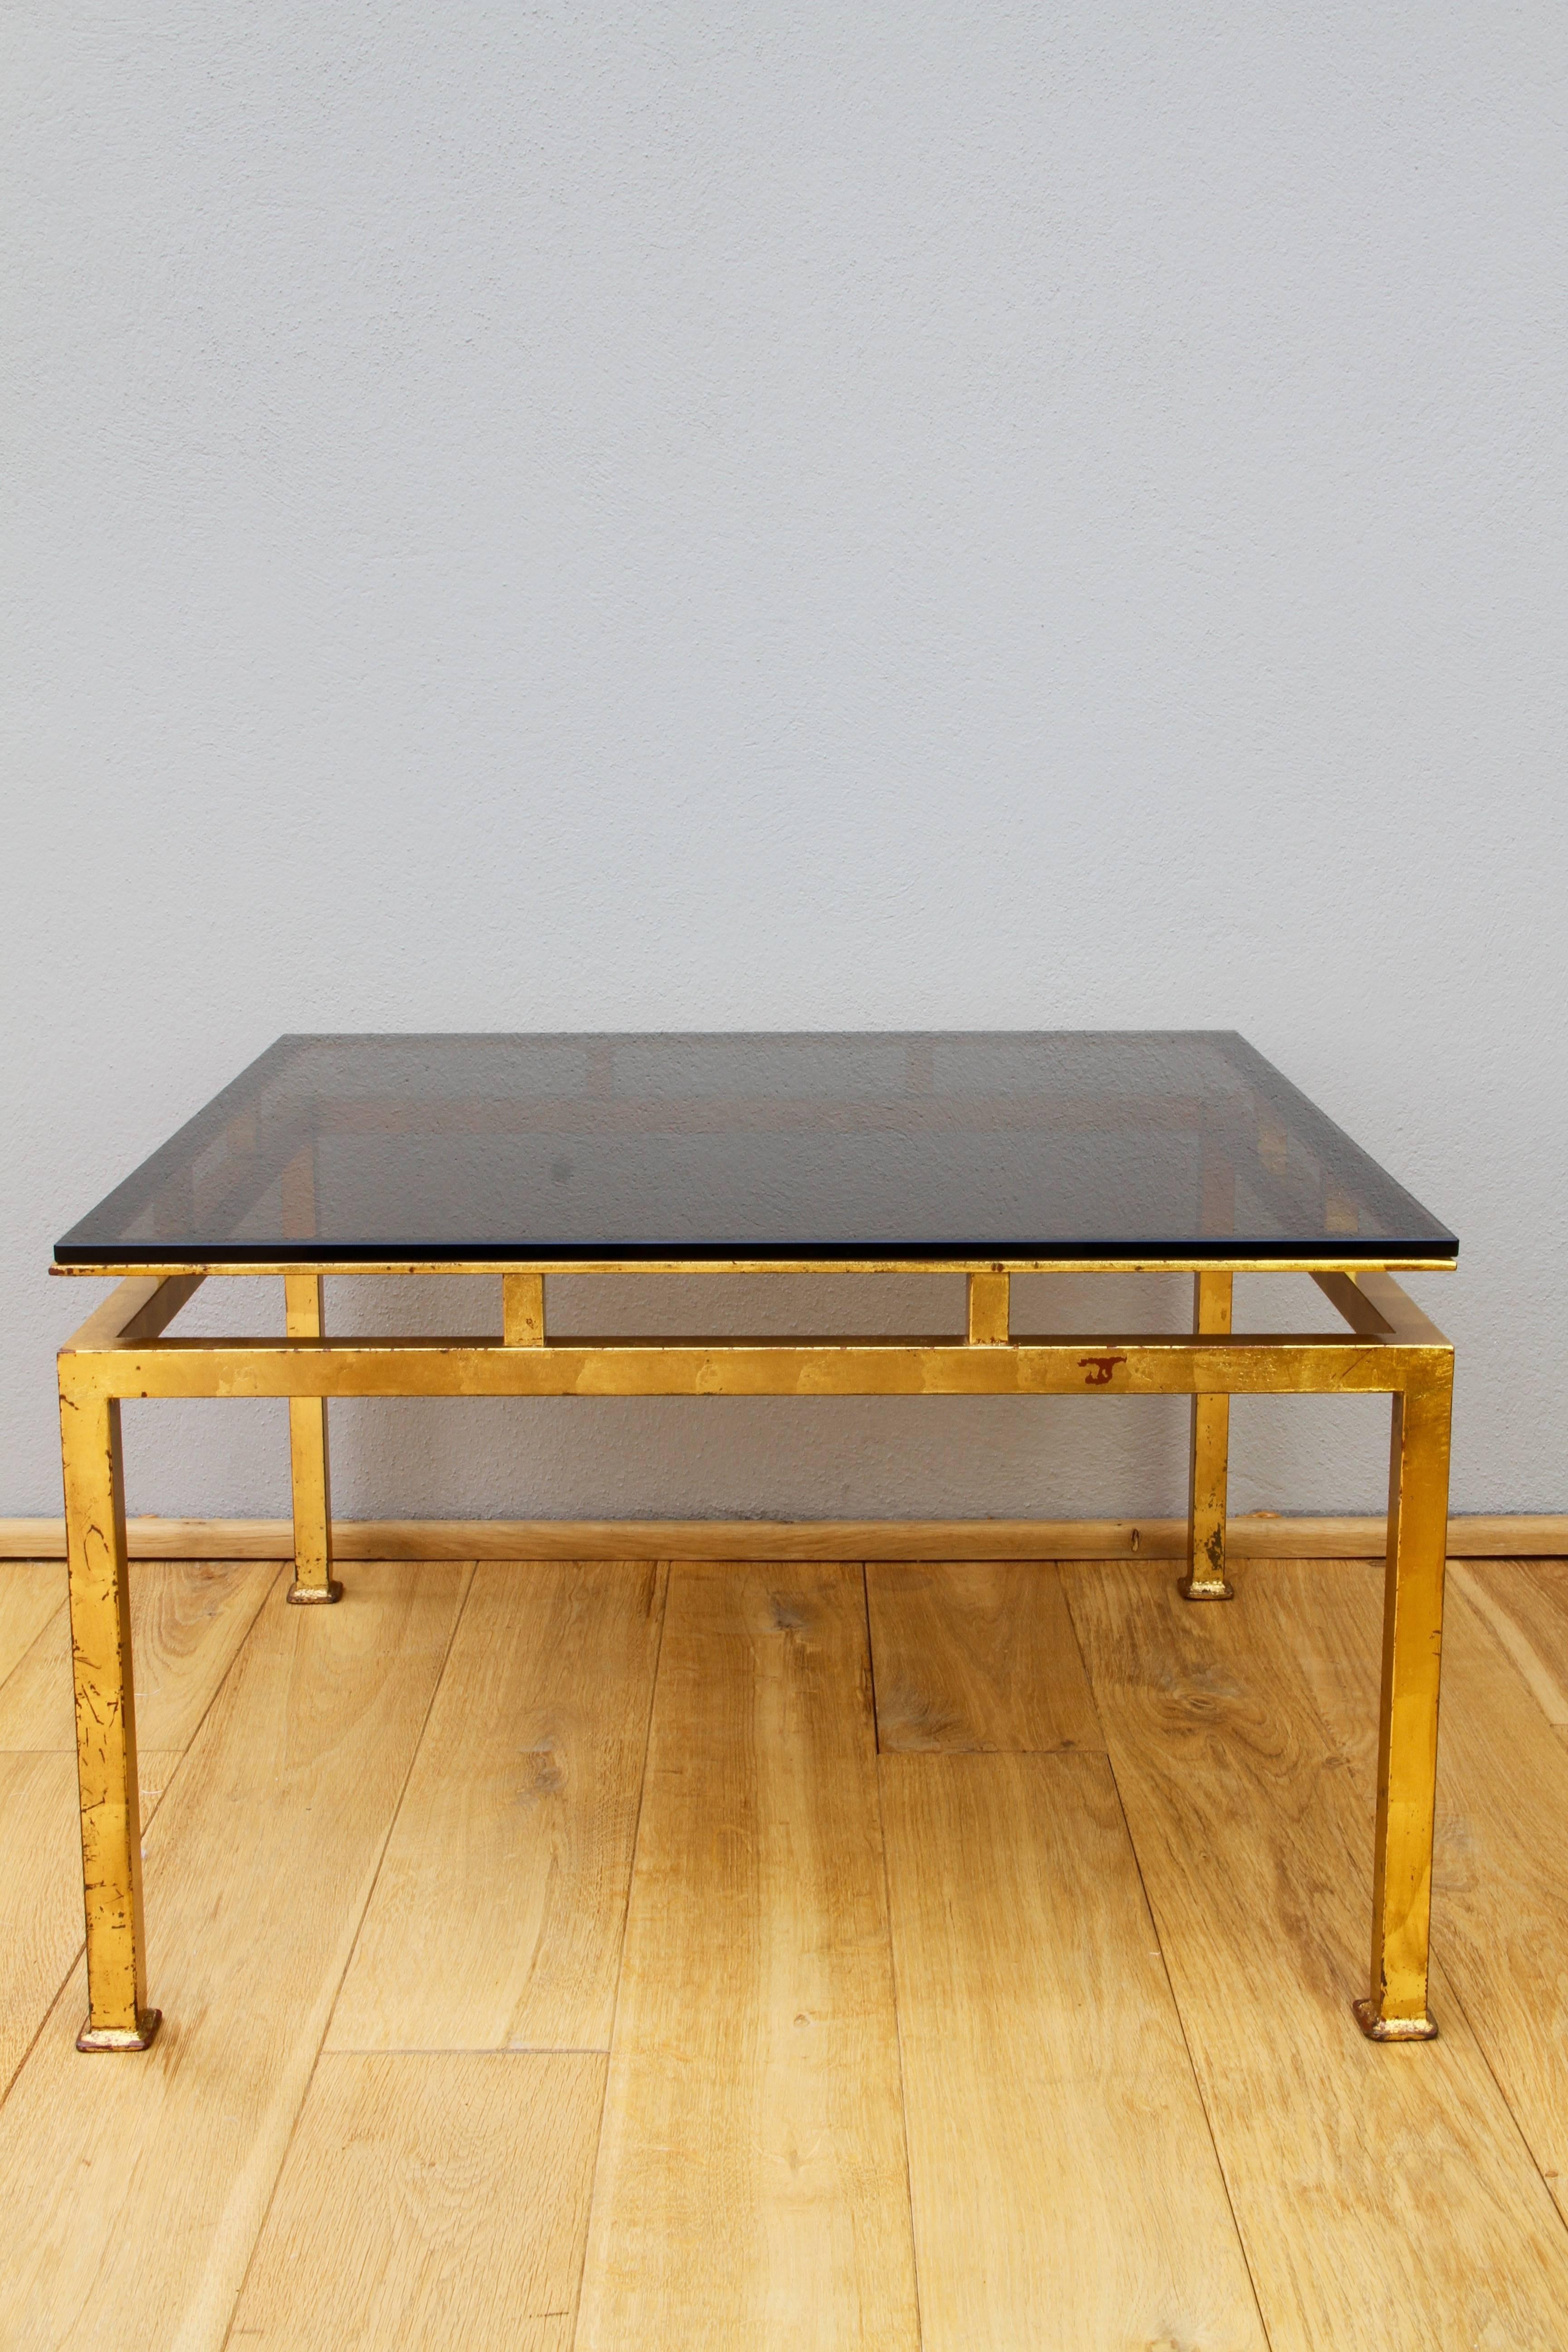 A large pair of French or Italian square Gilt iron coffee tables with thick smoked glass tops in the style of designer Guy Lefevre's work for Maison Jansen in the 1960s. They are also vaguely reminiscent of some of Paul McCobb's table designs. These